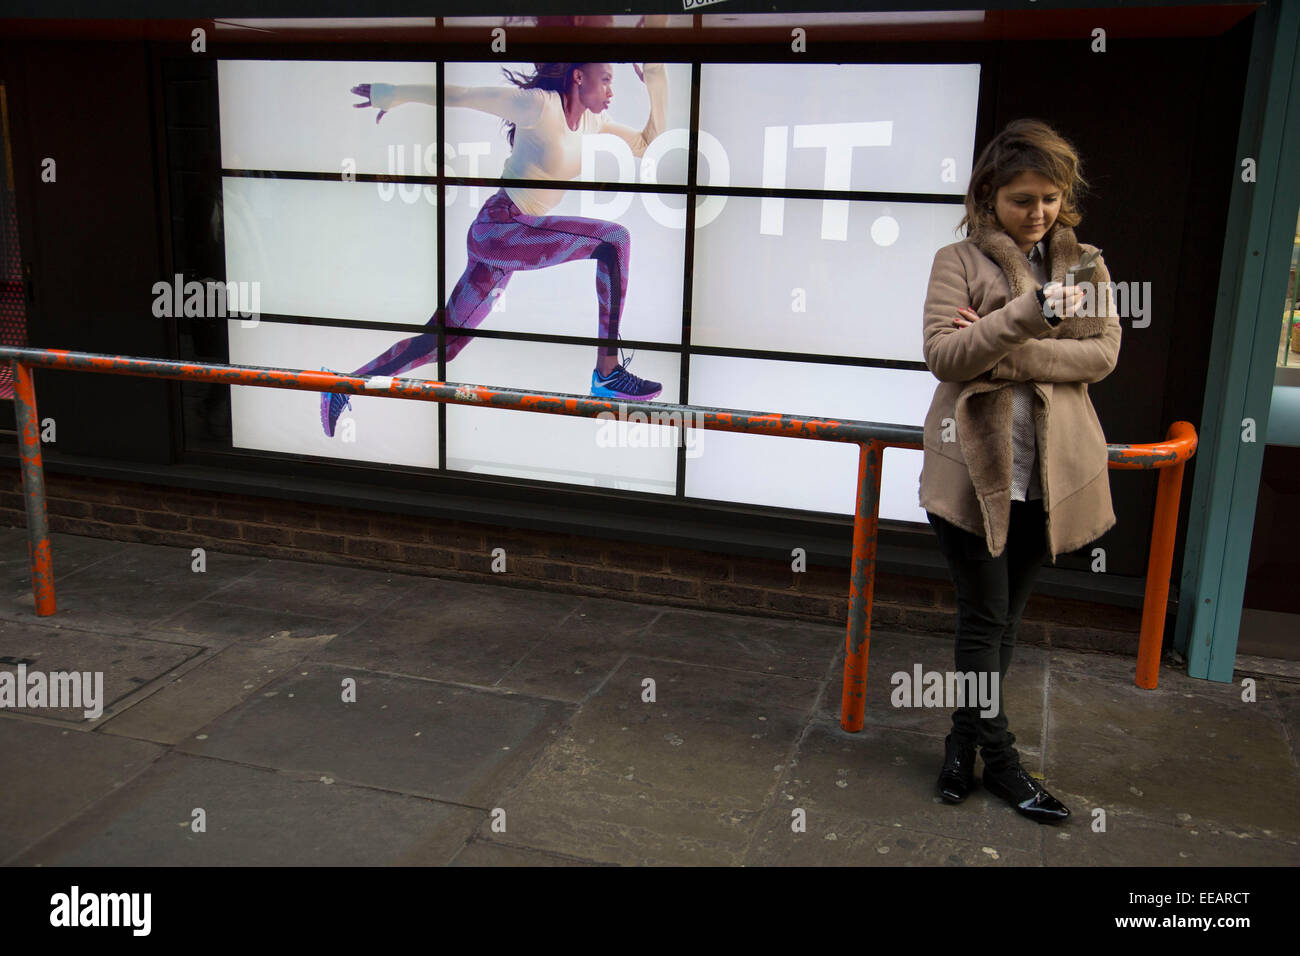 Nike advertising runner runs along a barrier near unsuspecting people. The  video advert with the slogan 'Just Do It" with a woman running across the  screen makes for an optical illusion of